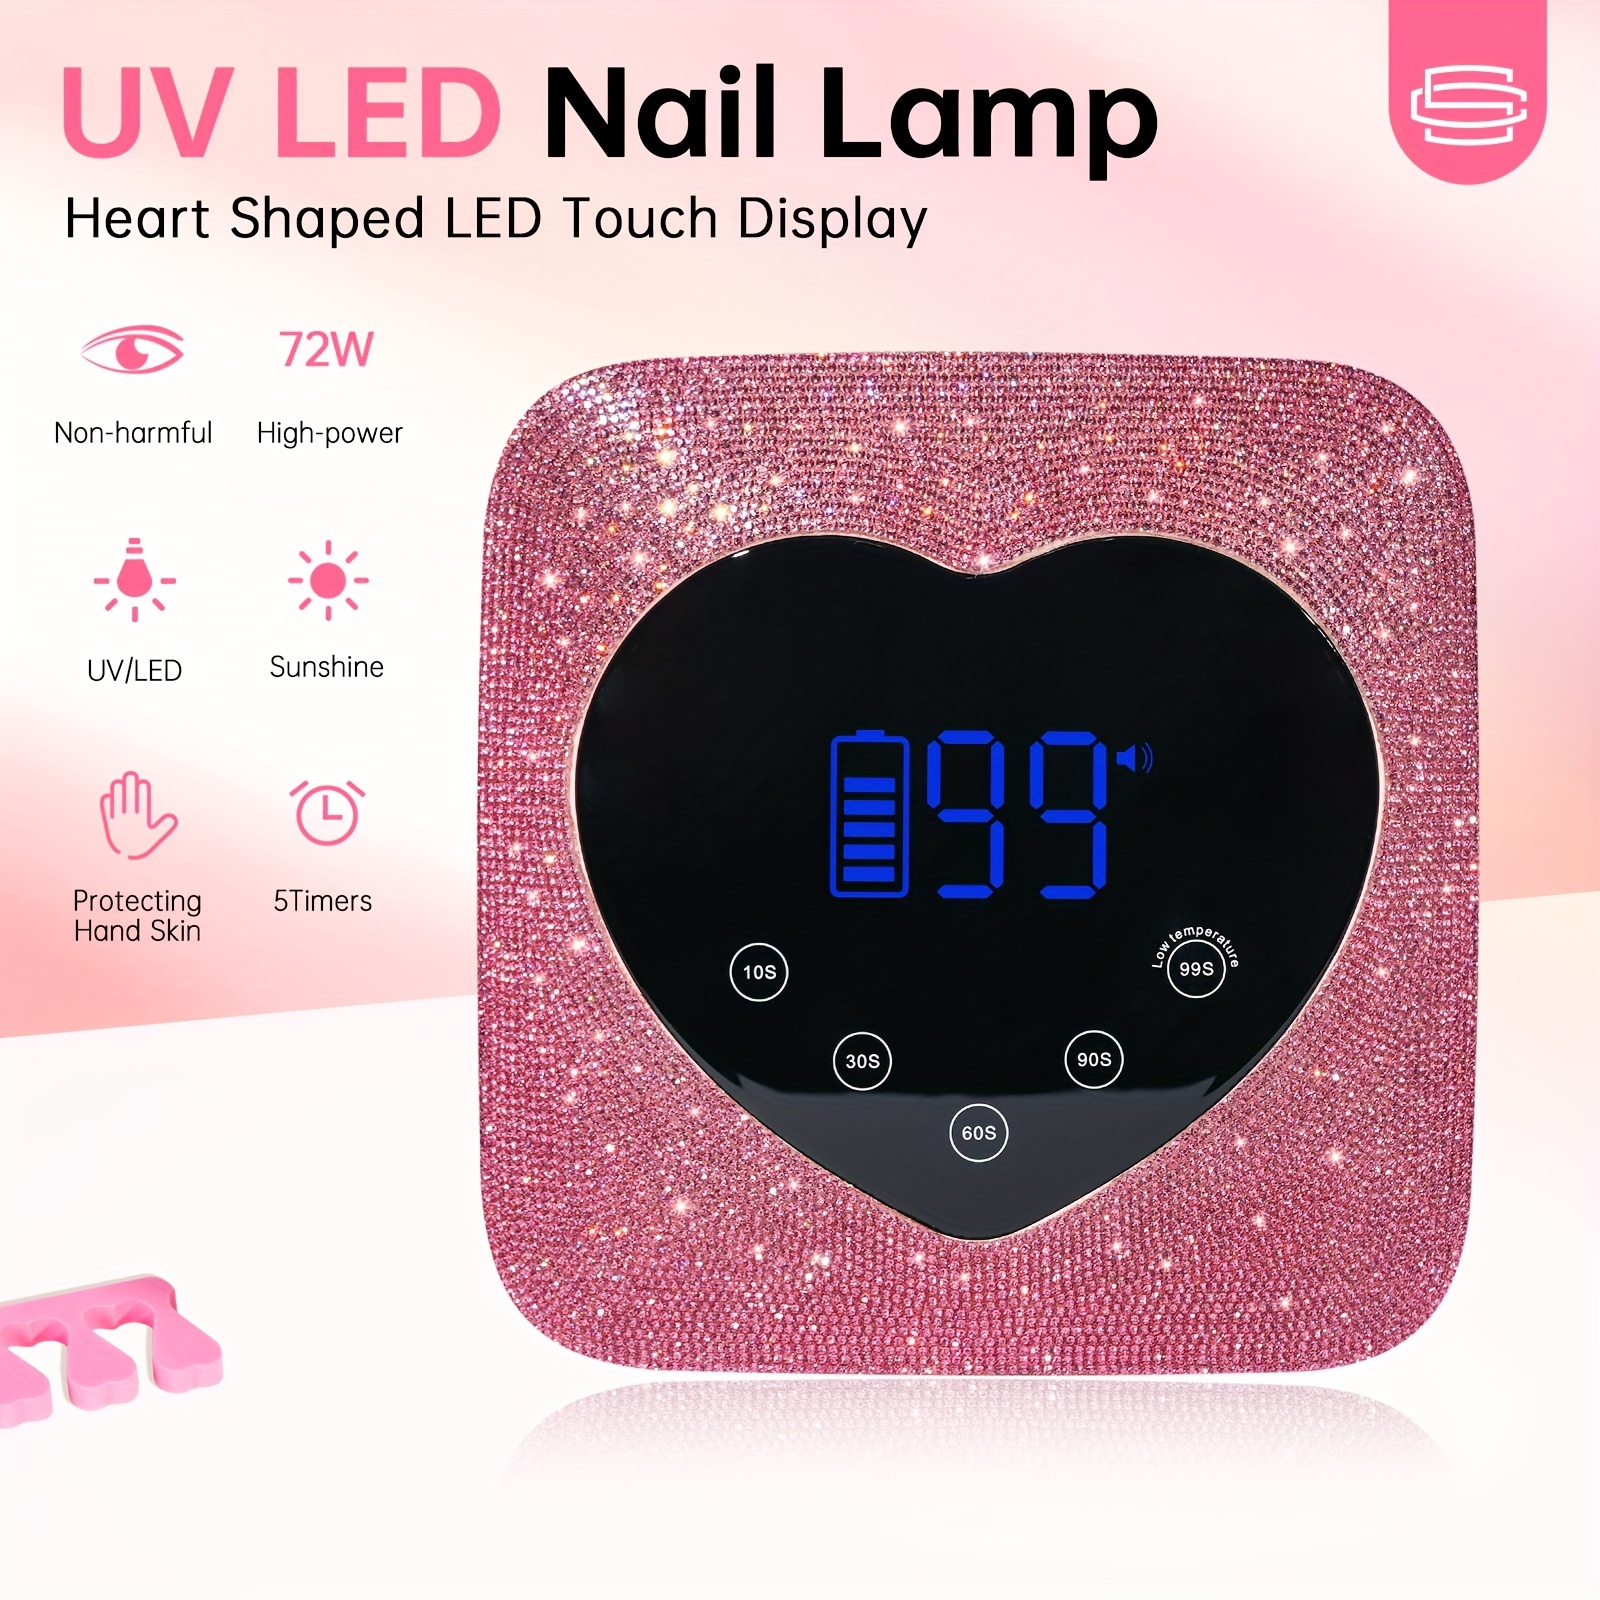 

Uv Led Nail Lamp Rechargeable Sparkly Wireless Nail Dryer Gel Polish Light With 5 Timer Setting Professional Quick Dry Curing Lamp Pink With Display Auto Sensor For Salon & Home